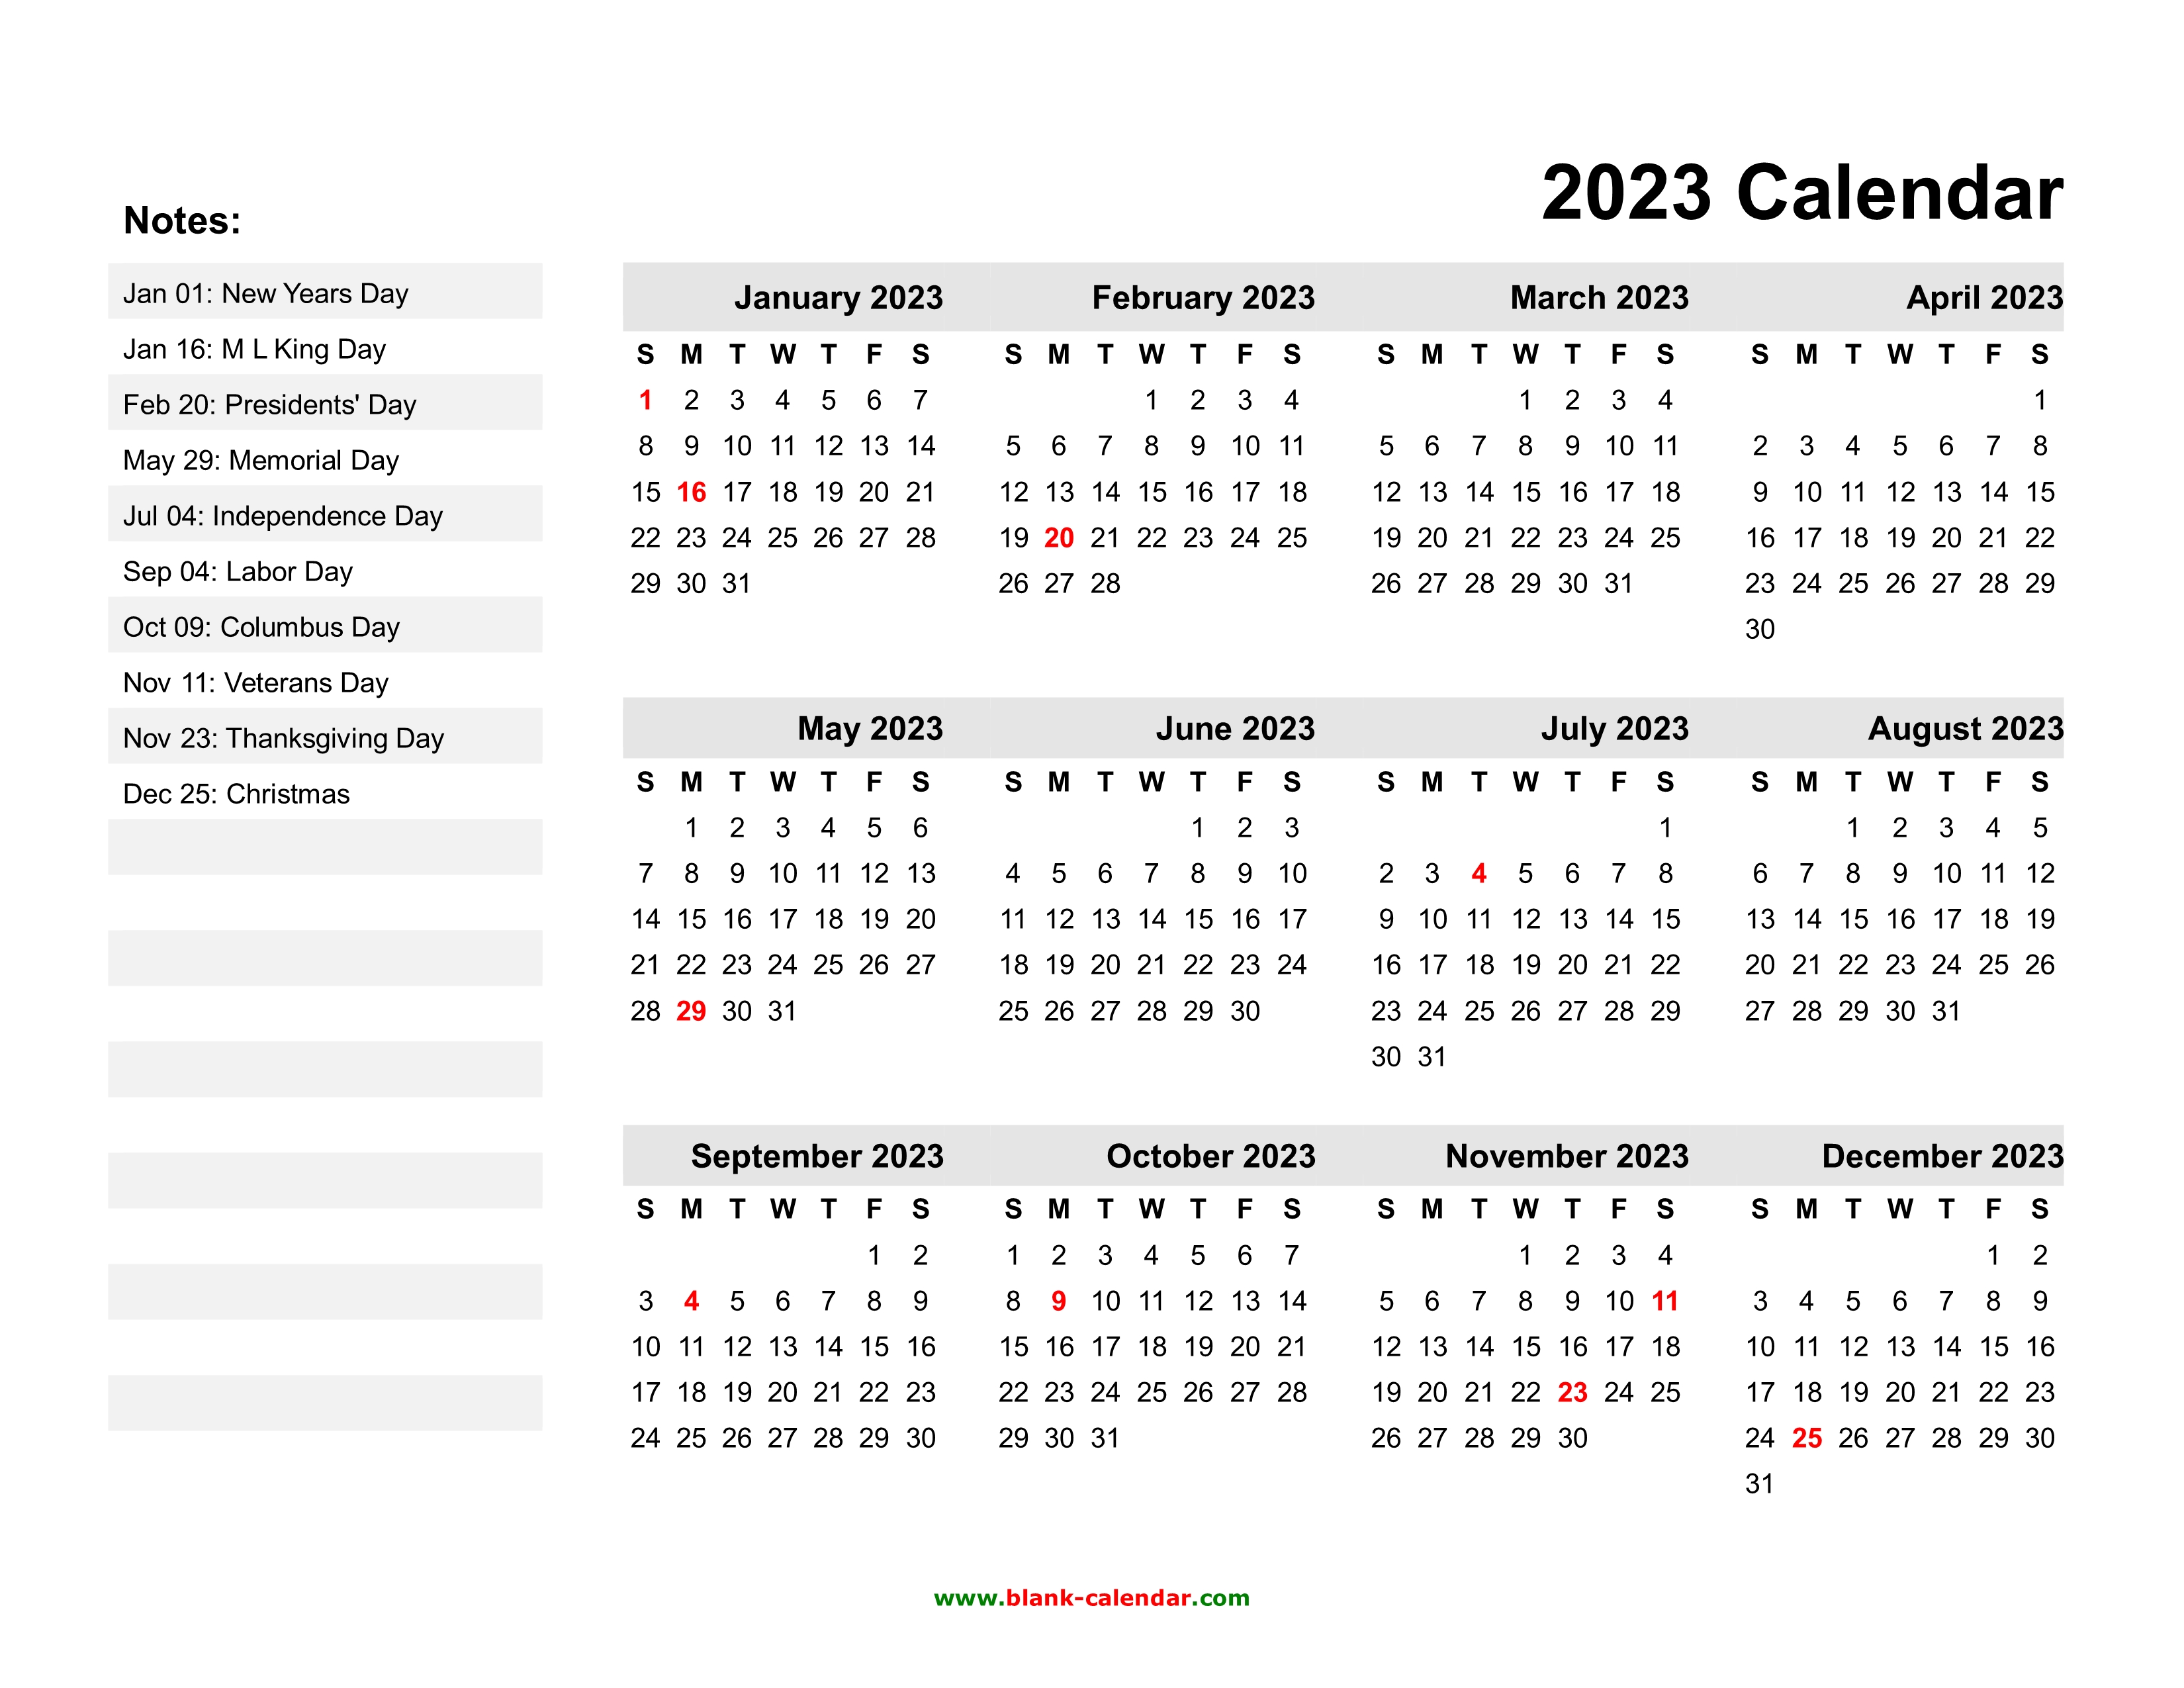 2023 united states calendar with holidays - 2023 calendar templates and